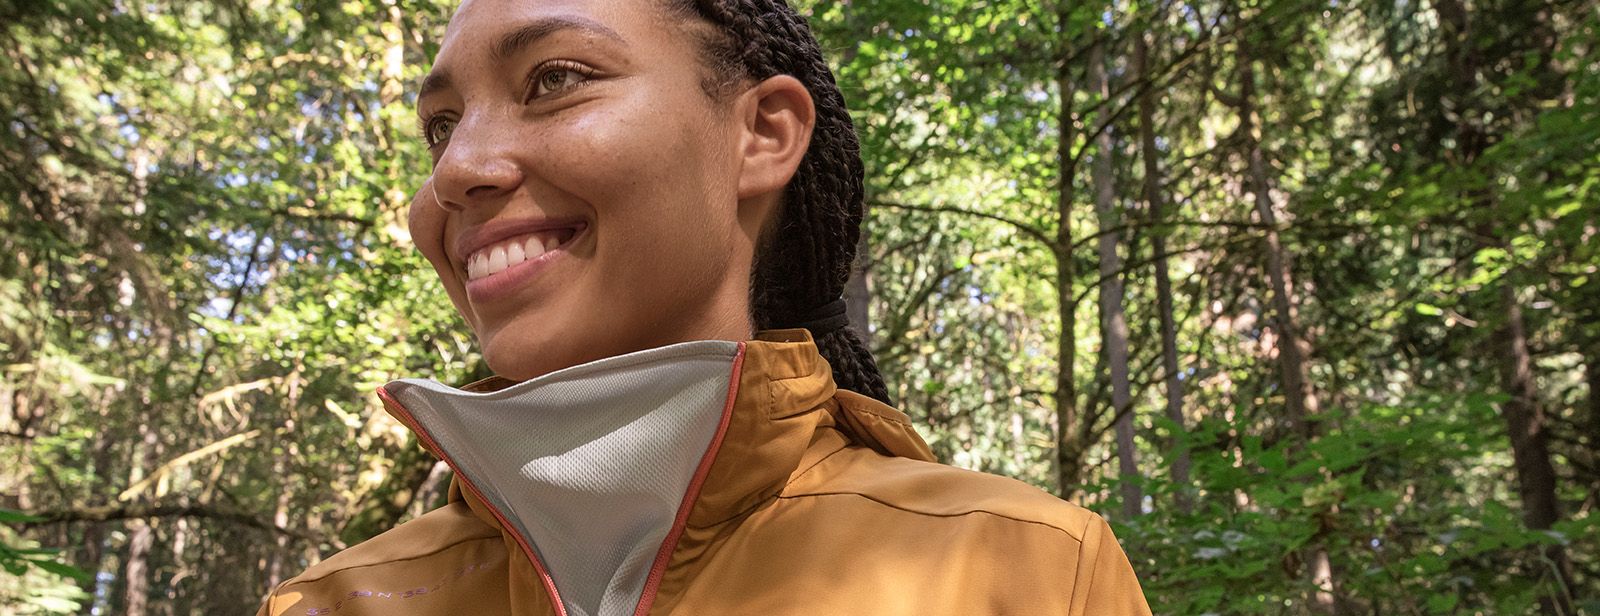 Woman wearing sustainable ASICS apparel smiling in the forest.